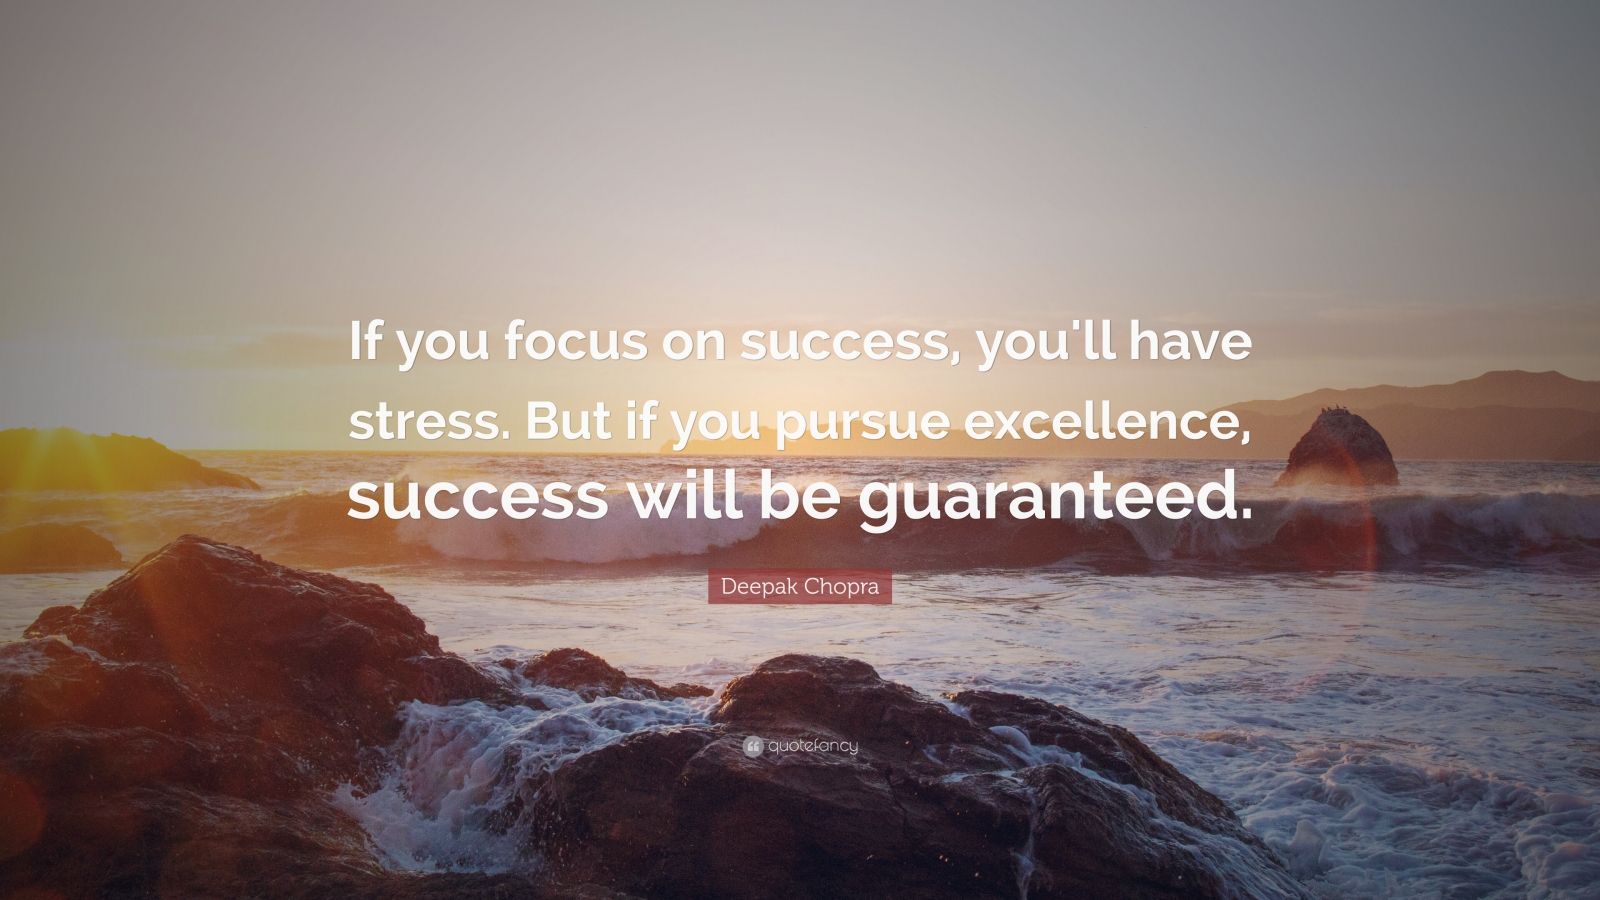 Deepak Chopra Quote If You Focus On Success Youll Have Stress But If You Pursue Excellence